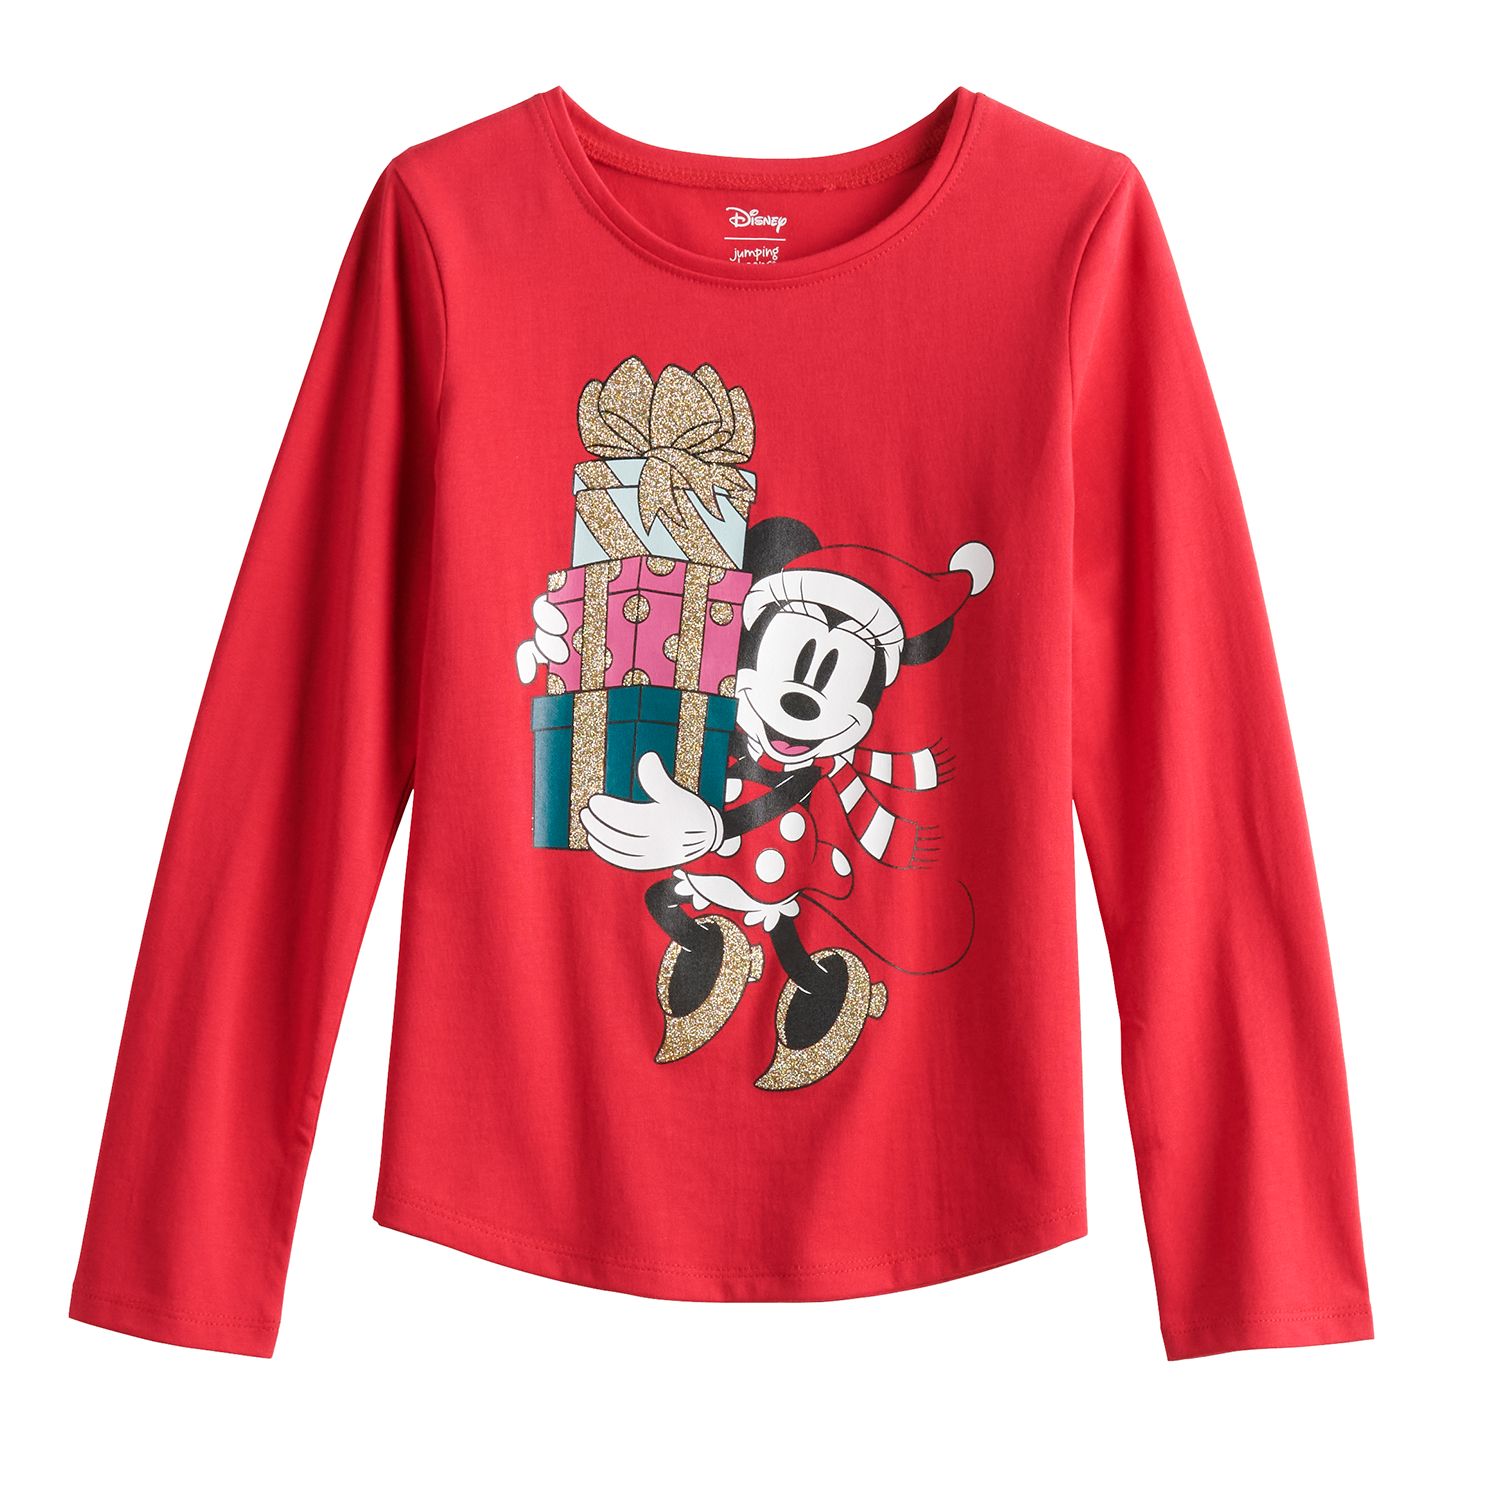 Image for Disney/Jumping Beans Disney's Minnie Mouse Girls 4-12 Long-Sleeve Shirt by Jumping Beans® at Kohl's.